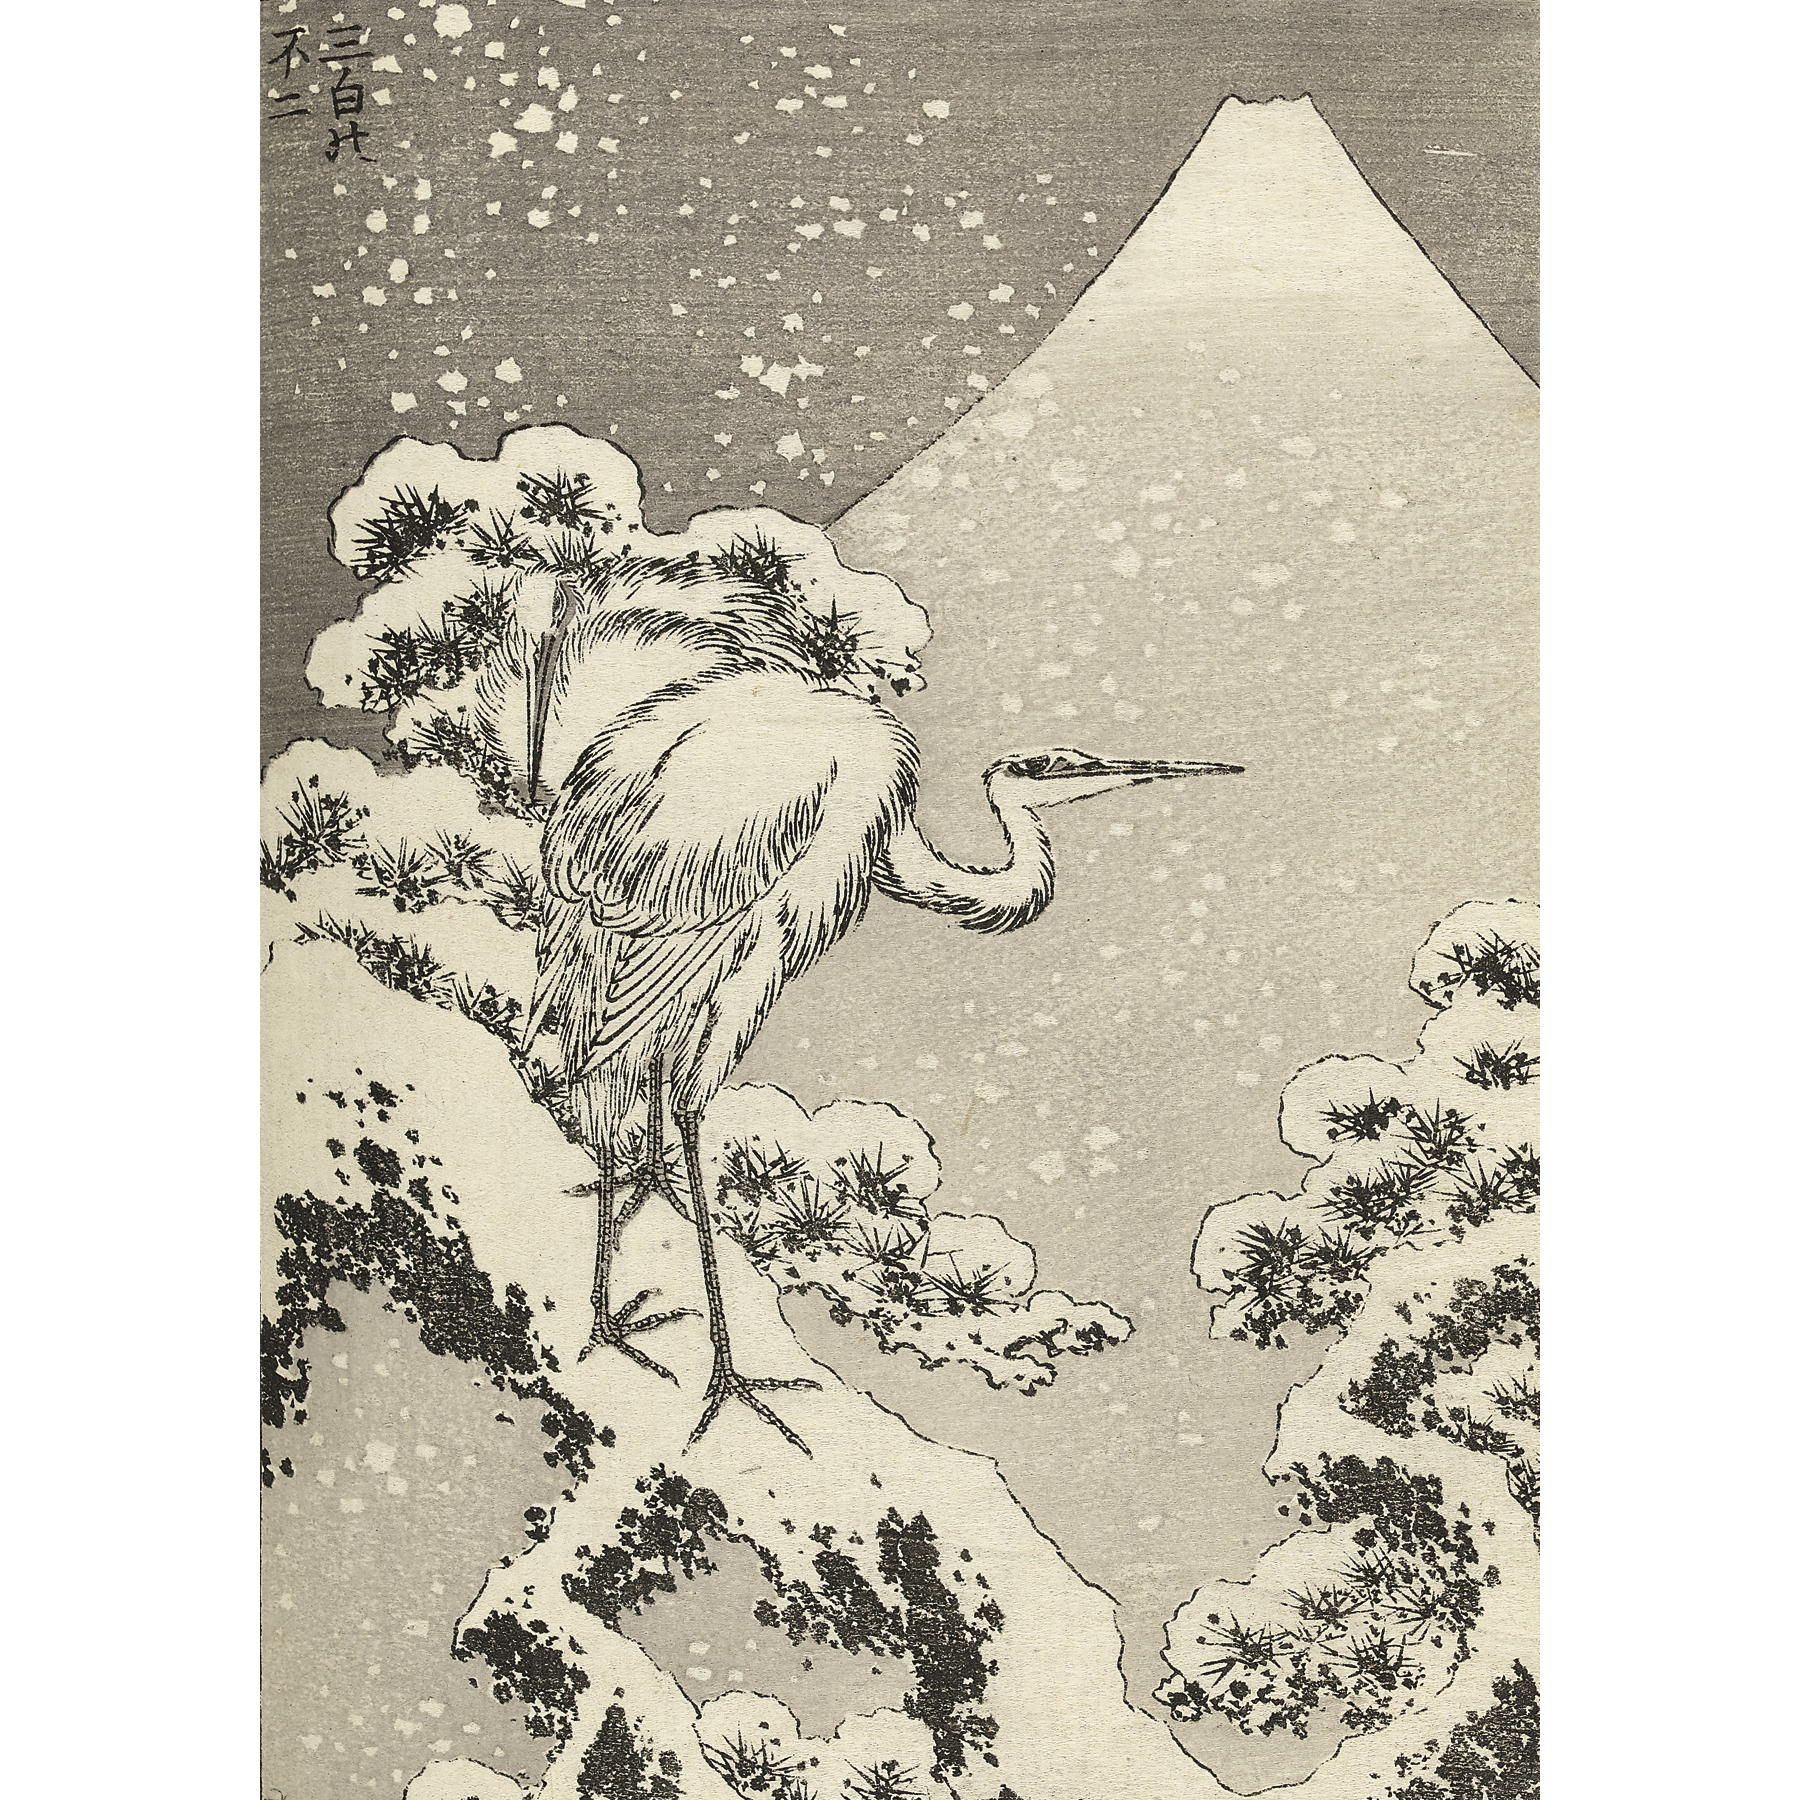 Rectangular Christmas card, portrait format. Japanese woodblock - white crane on a snowy branch with snowy mountain behind. From the collection of The Fitzwilliam Museum, brought to you by CuratingCambridge.com